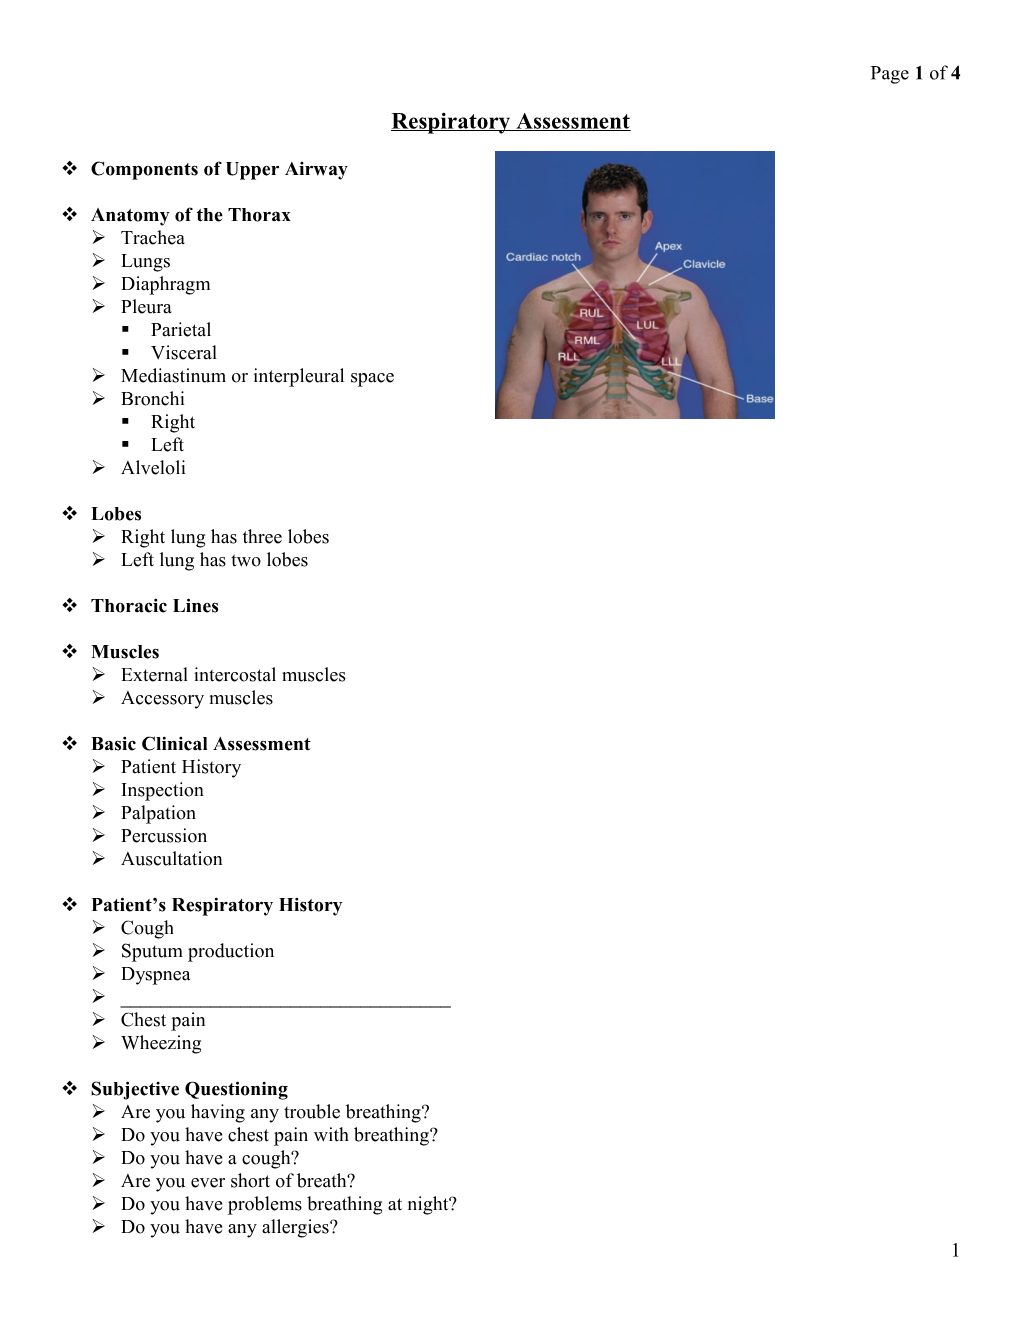 Components of Upper Airway